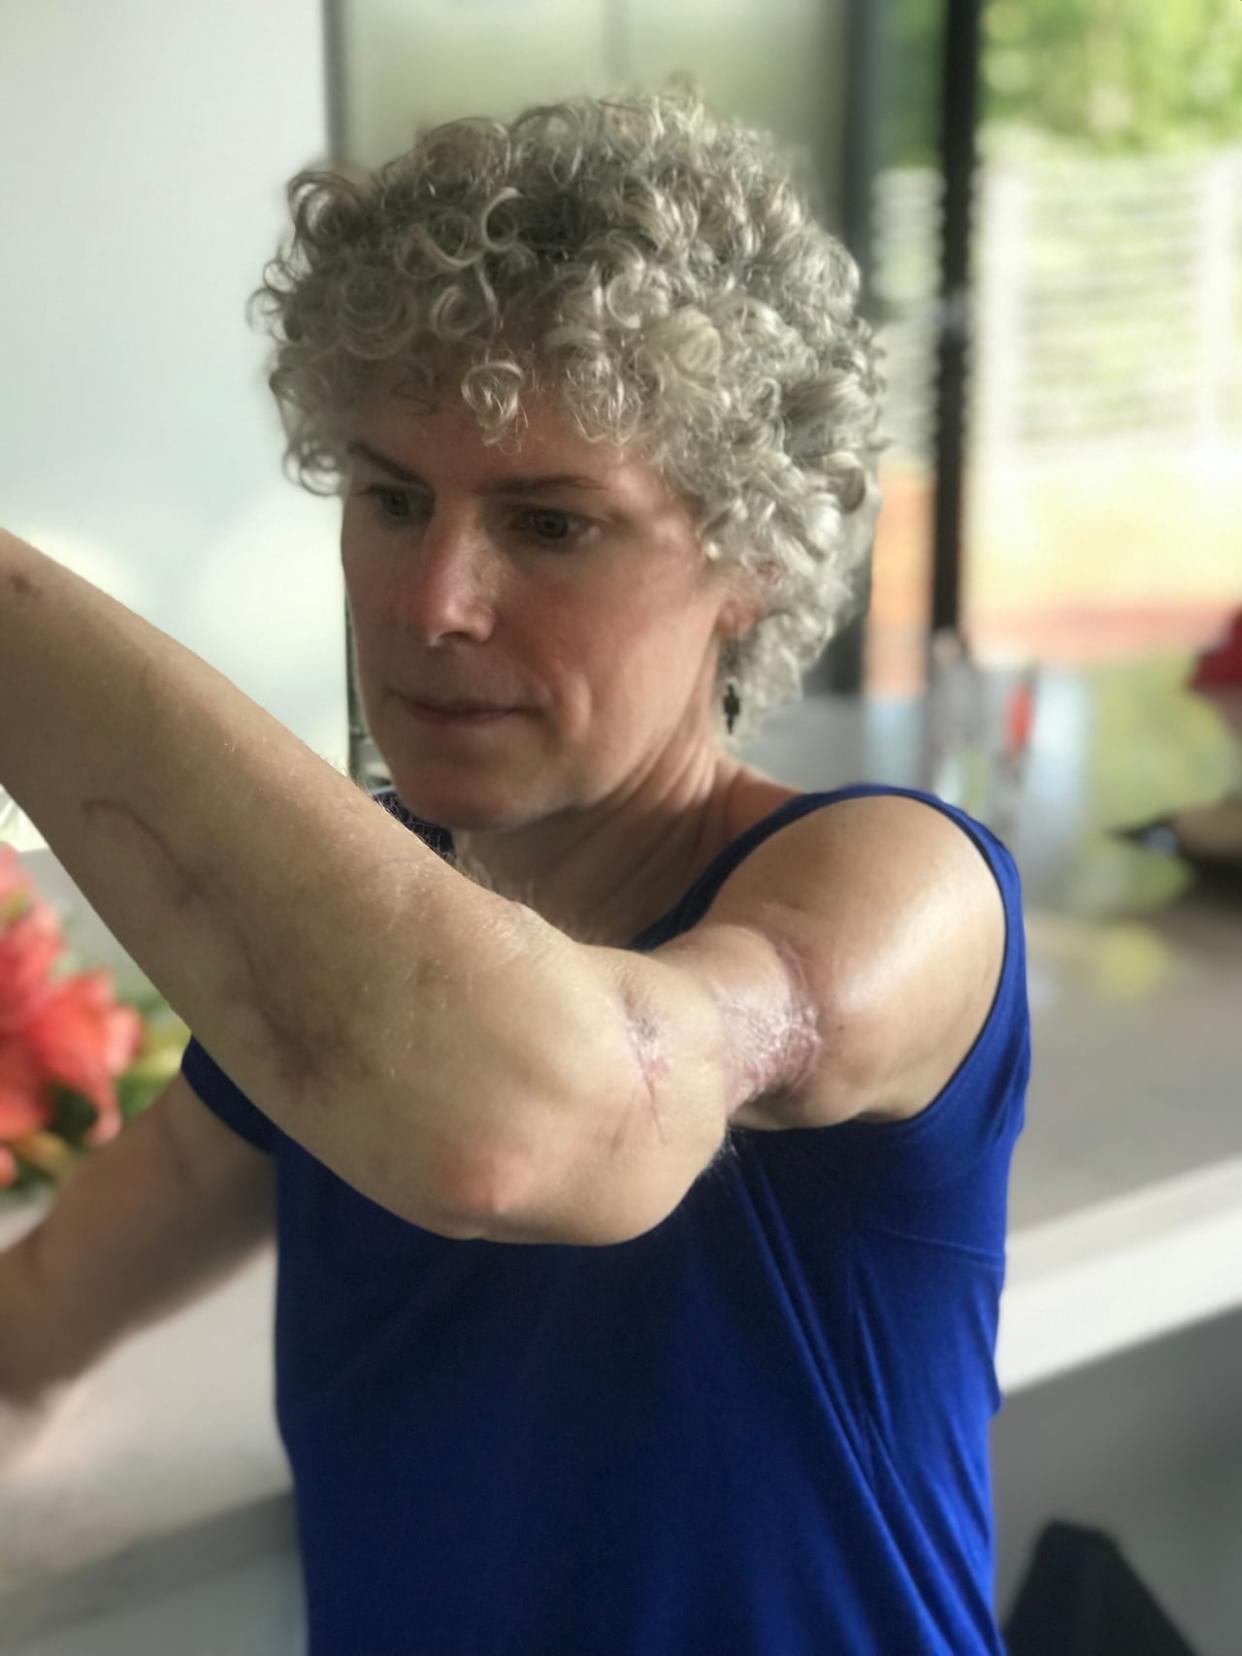 Dominique Alain lost her triceps in a 2019 dog attack. A Quebec Superior Court judge ordered the town and dog owner Alan Barnes to pay her nearly $460,000.   (Denis Gervais/Radio-Canada - image credit)